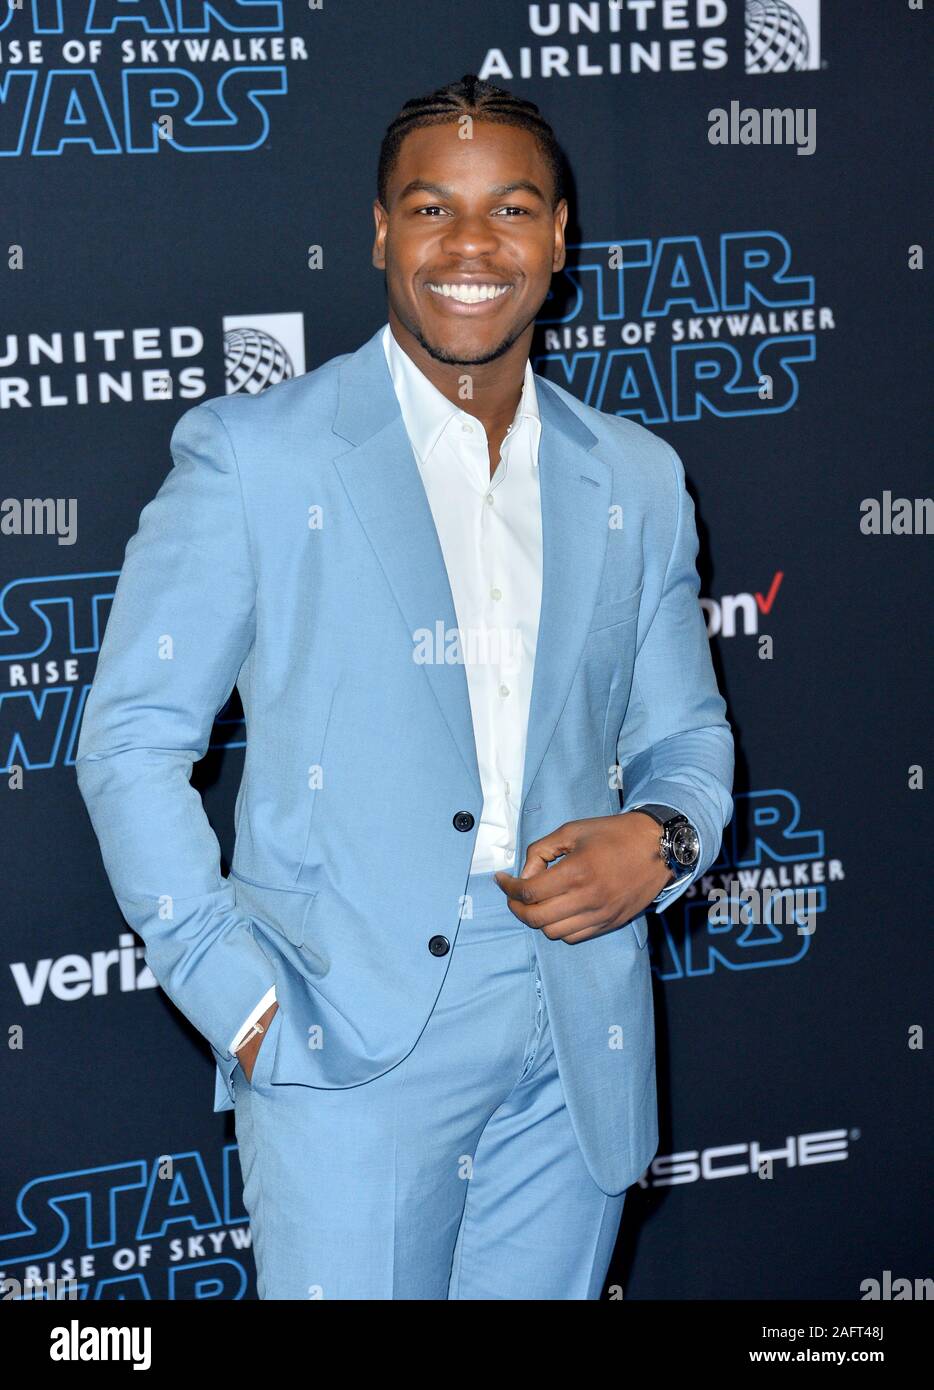 Los Angeles, USA. 16th Dec, 2019. LOS ANGELES, USA. December 16, 2019: John Boyega at the world premiere of 'Star Wars: The Rise of Skywalker' at the El Capitan Theatre. Picture Credit: Paul Smith/Alamy Live News Stock Photo